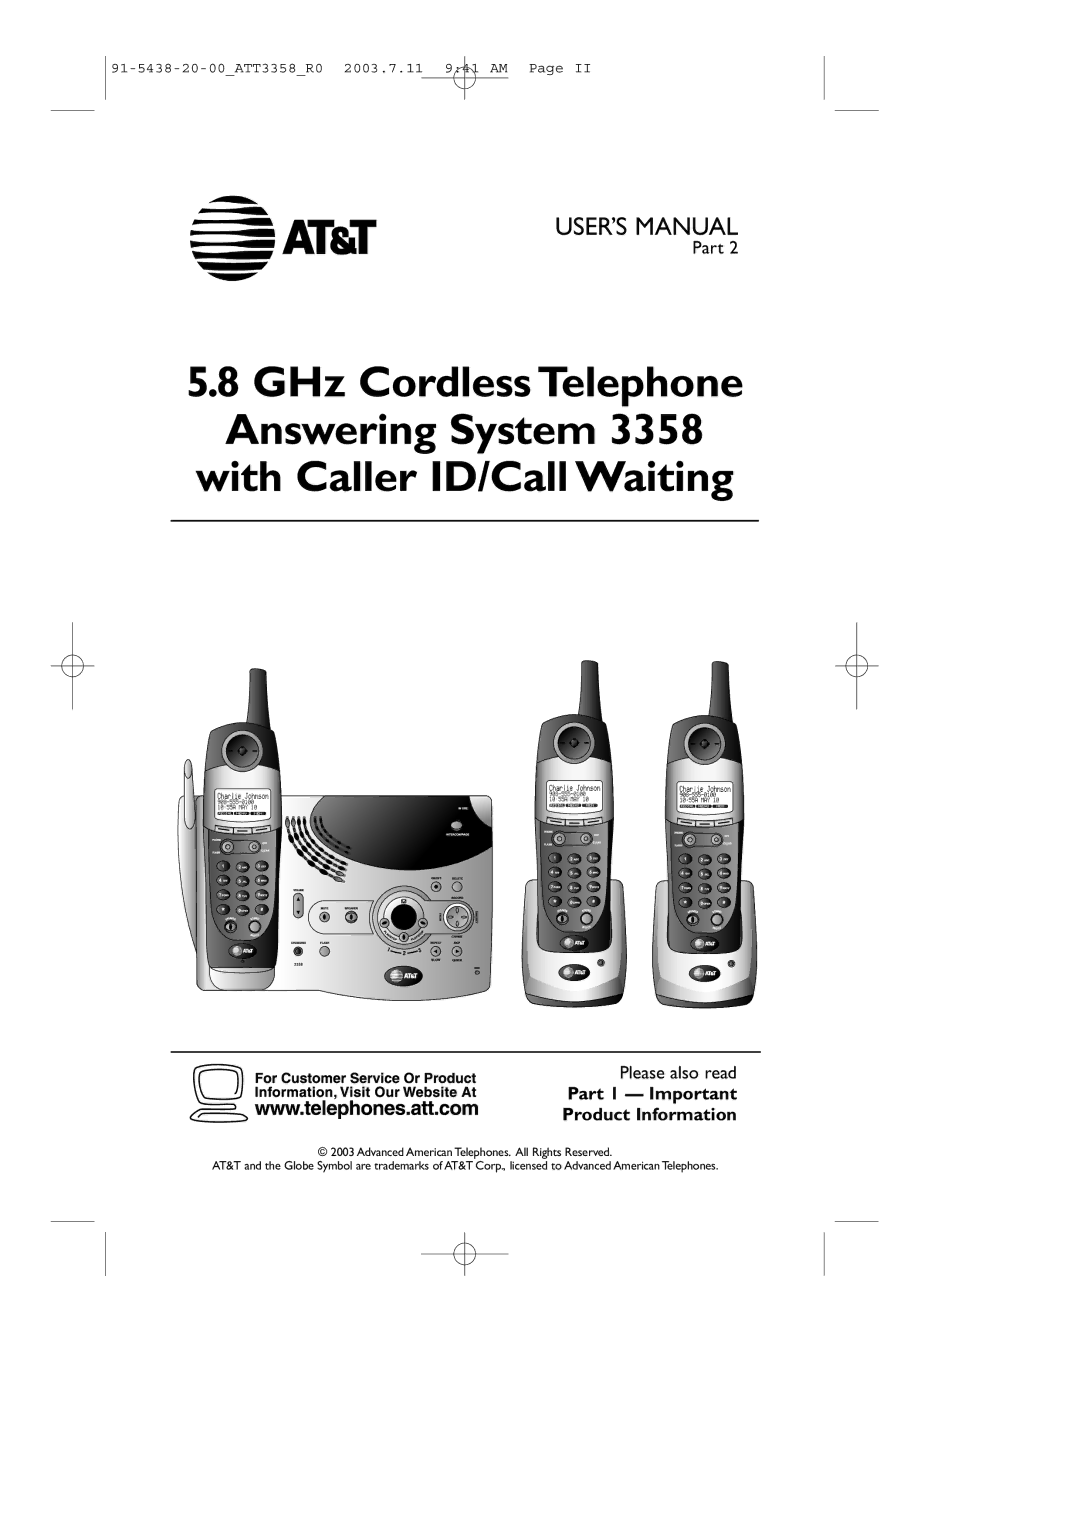 AT&T 3358 user manual With Caller ID/Call Waiting, Part 1 Important Product Information 